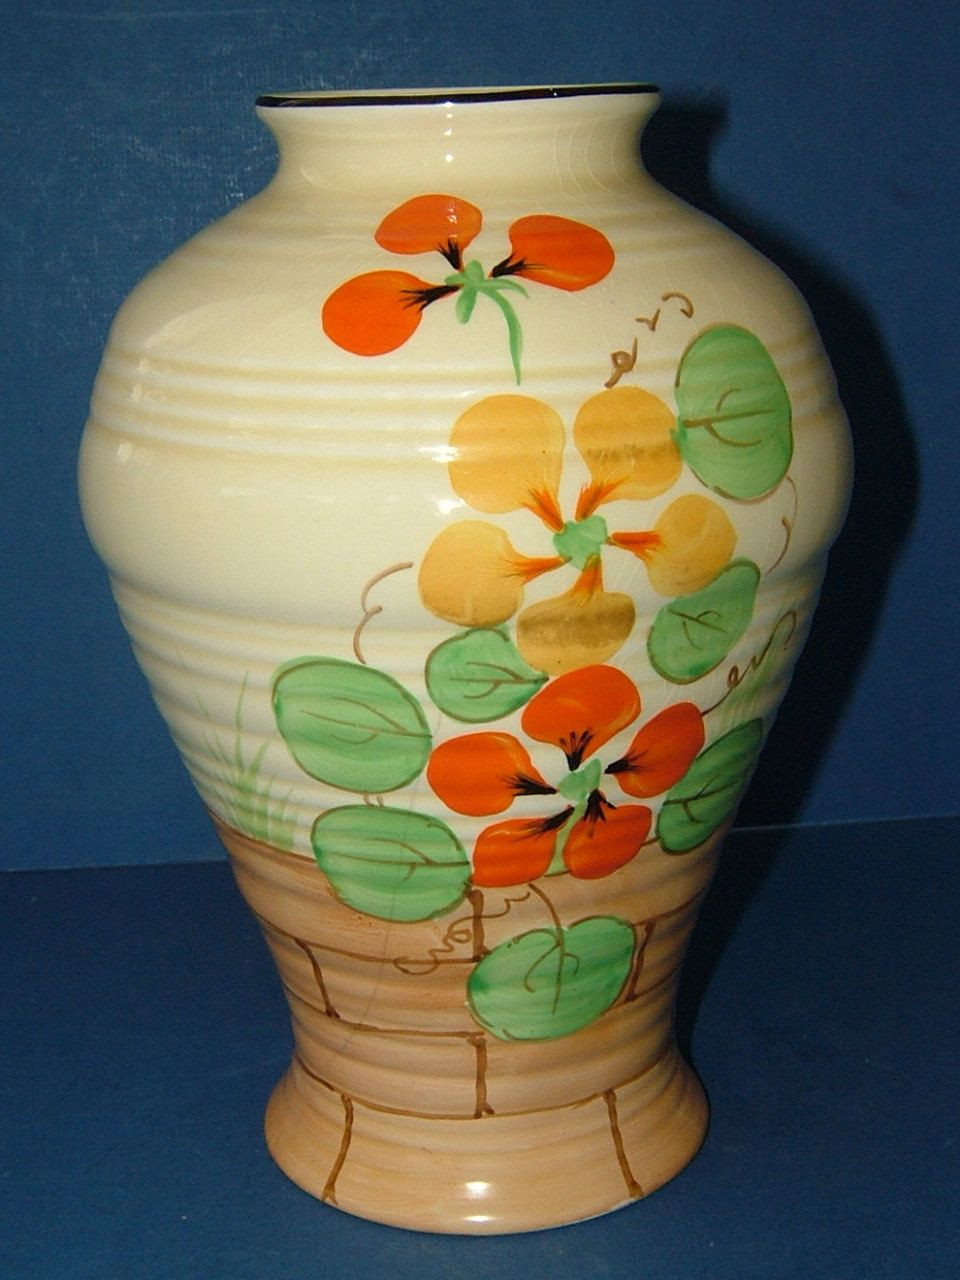 10 Lovely Moorcroft Sunflower Vase 2024 free download moorcroft sunflower vase of jhw weatherby art deco durability falcon ware hand painted vase throughout jhw weatherby art deco durability falcon ware hand painted vase summer flowers